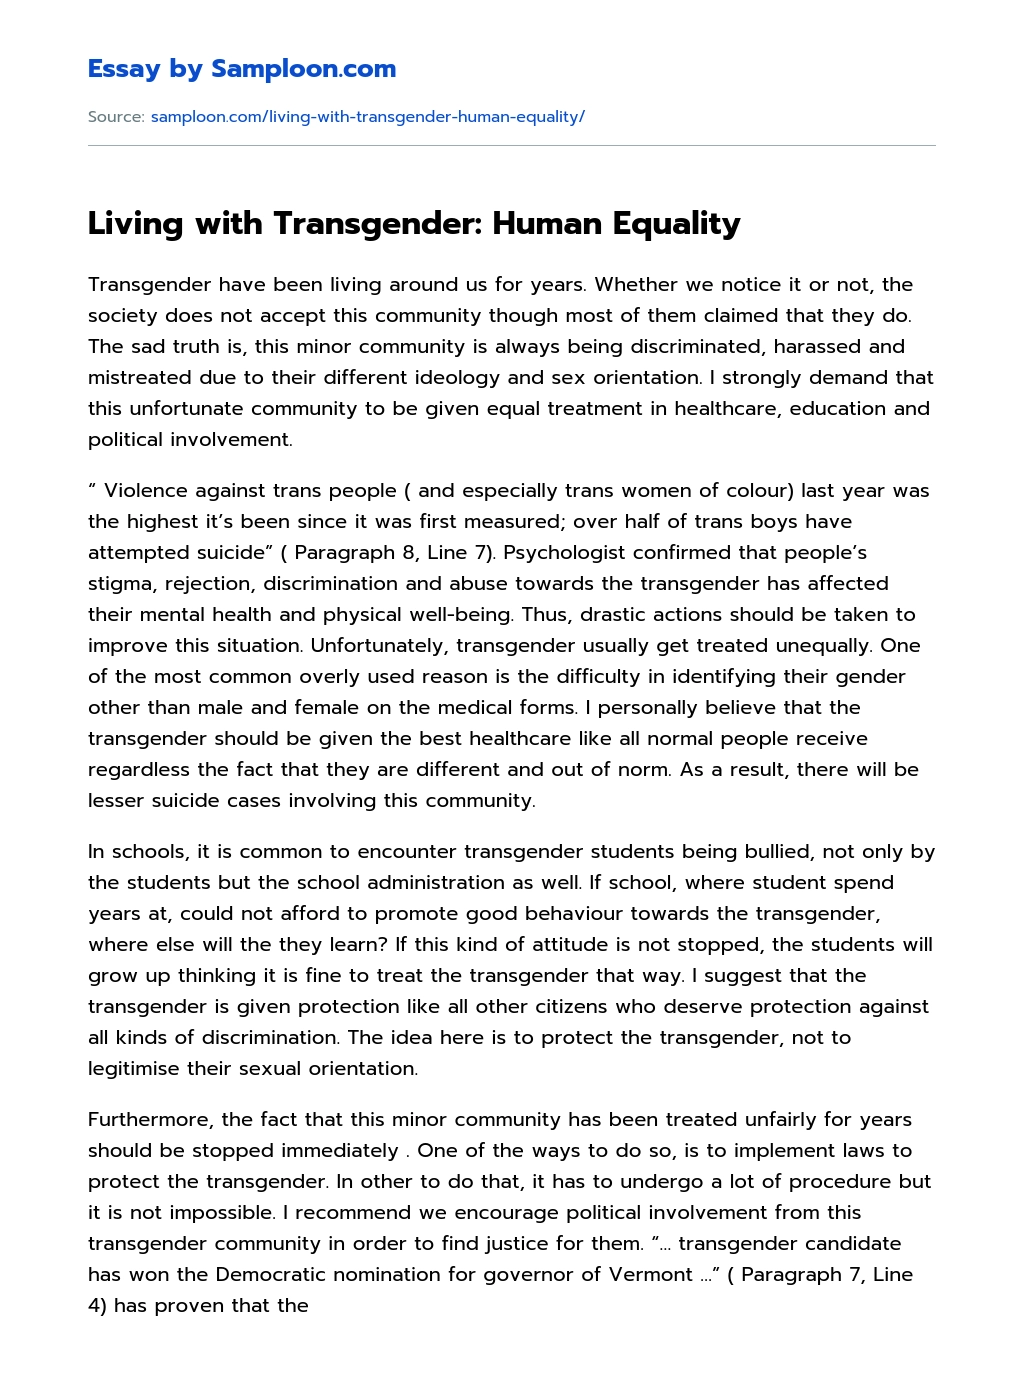 Living with Transgender: Human Equality essay